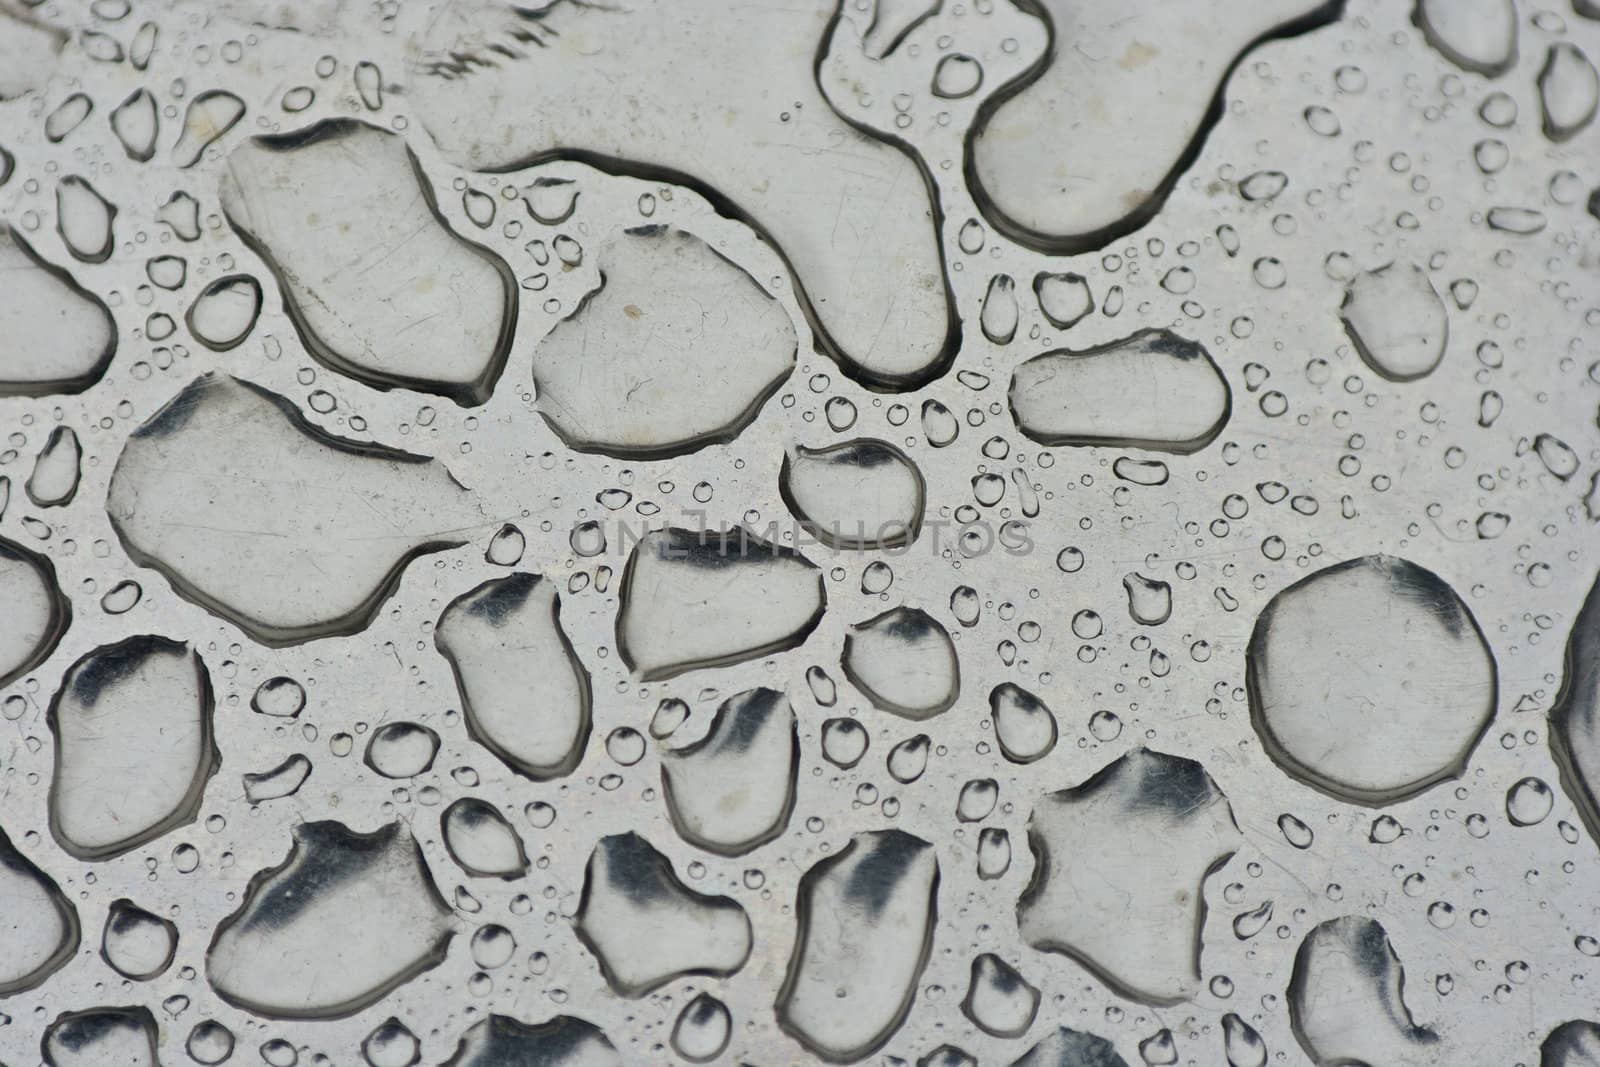 Water droplets collected on the top of a shinny silver surface.